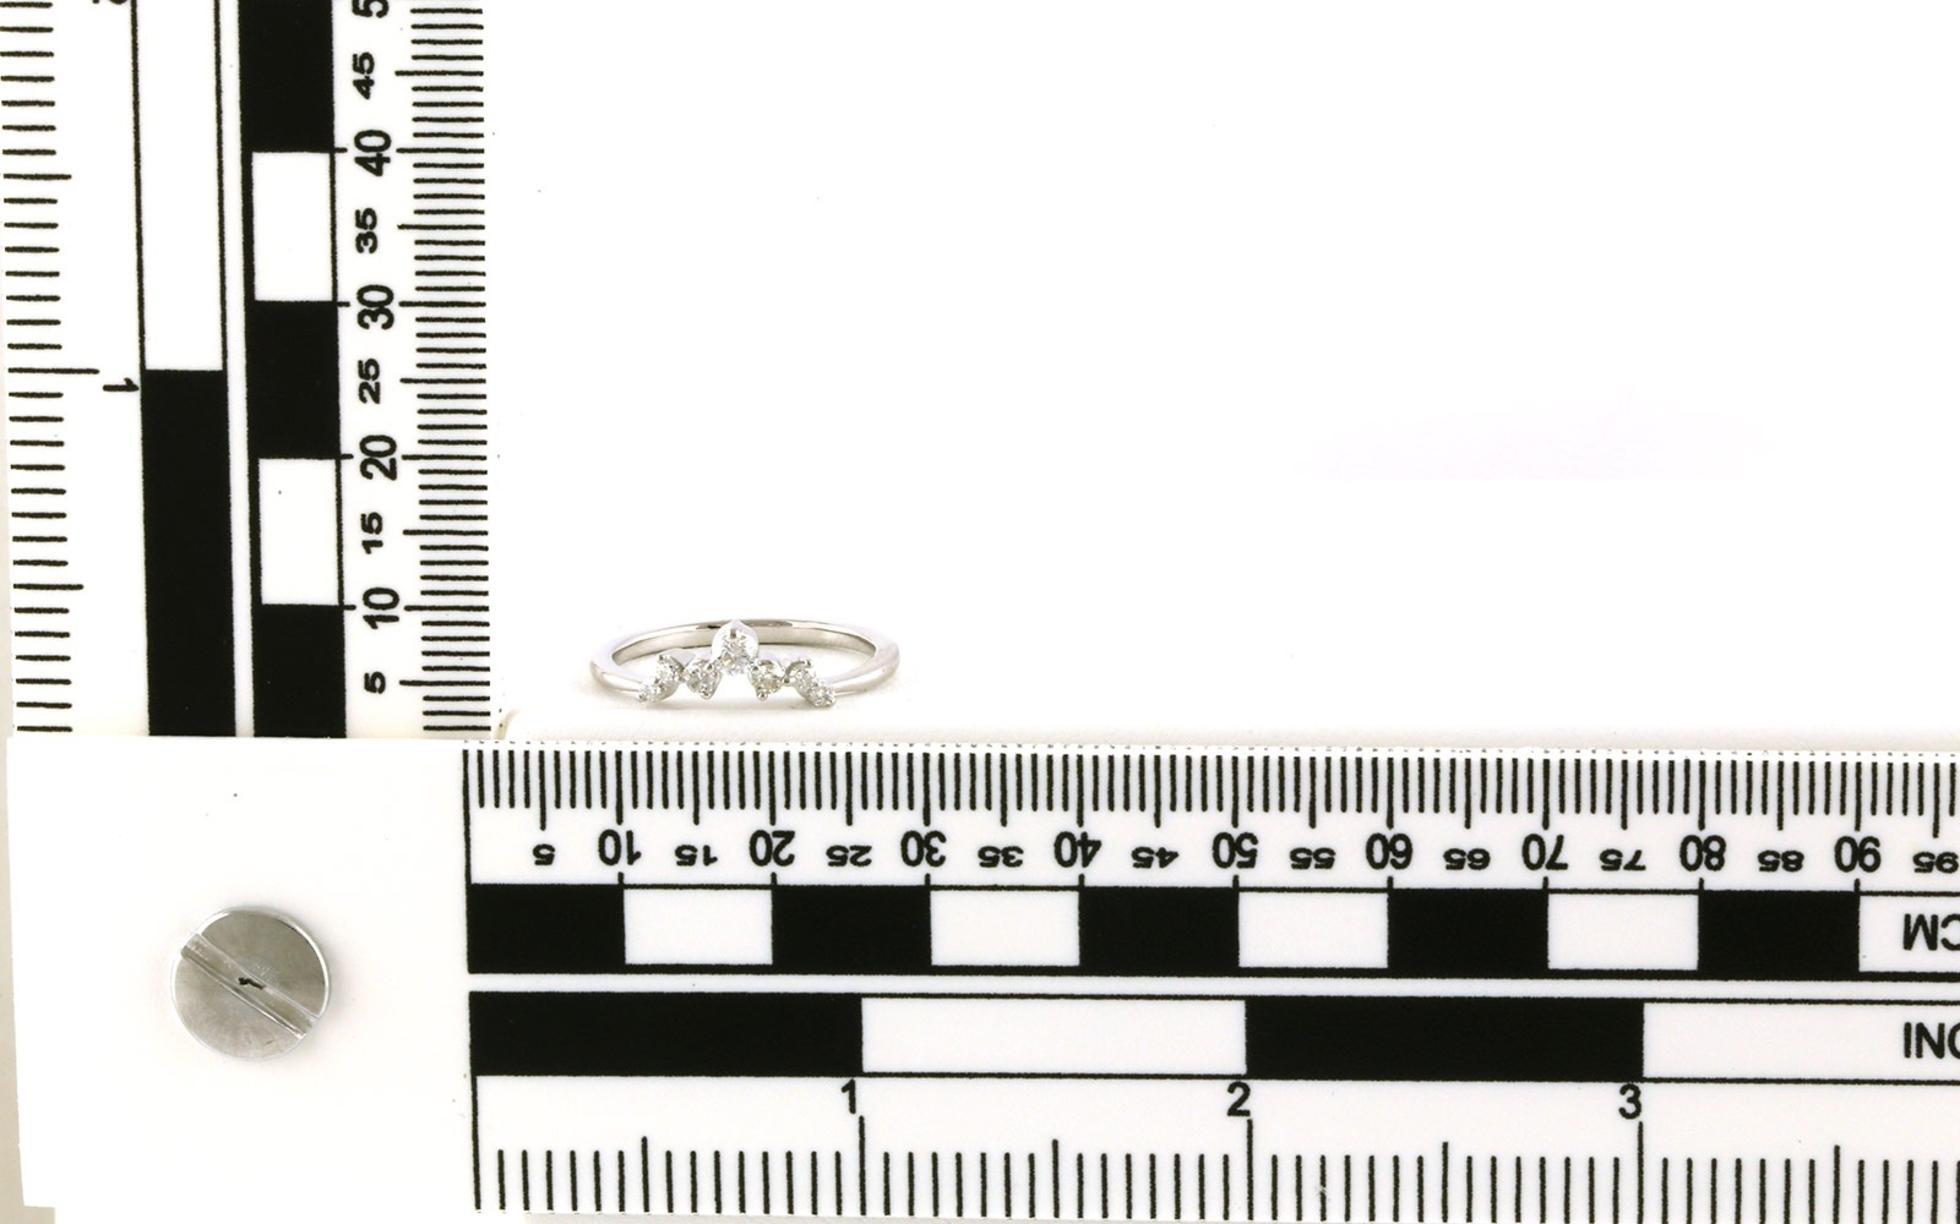 Chevron-style Alternating Size Diamonds Band in White Gold (0.25cts TWT) scale